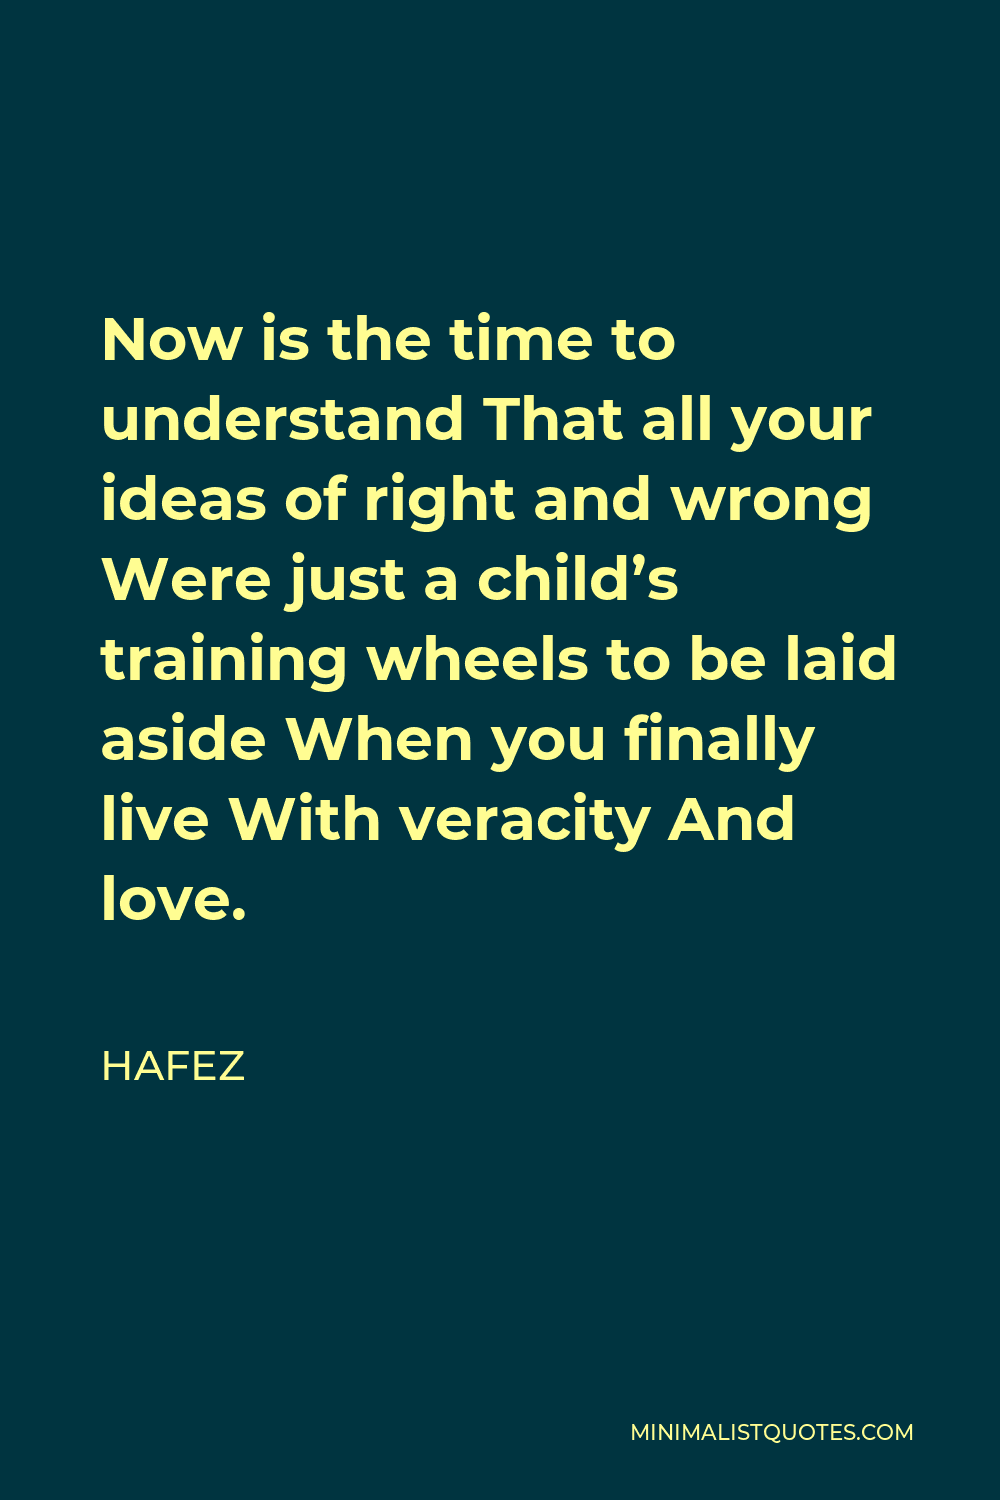 Hafez Quote - Now is the time to understand That all your ideas of right and wrong Were just a child’s training wheels to be laid aside When you finally live With veracity And love.